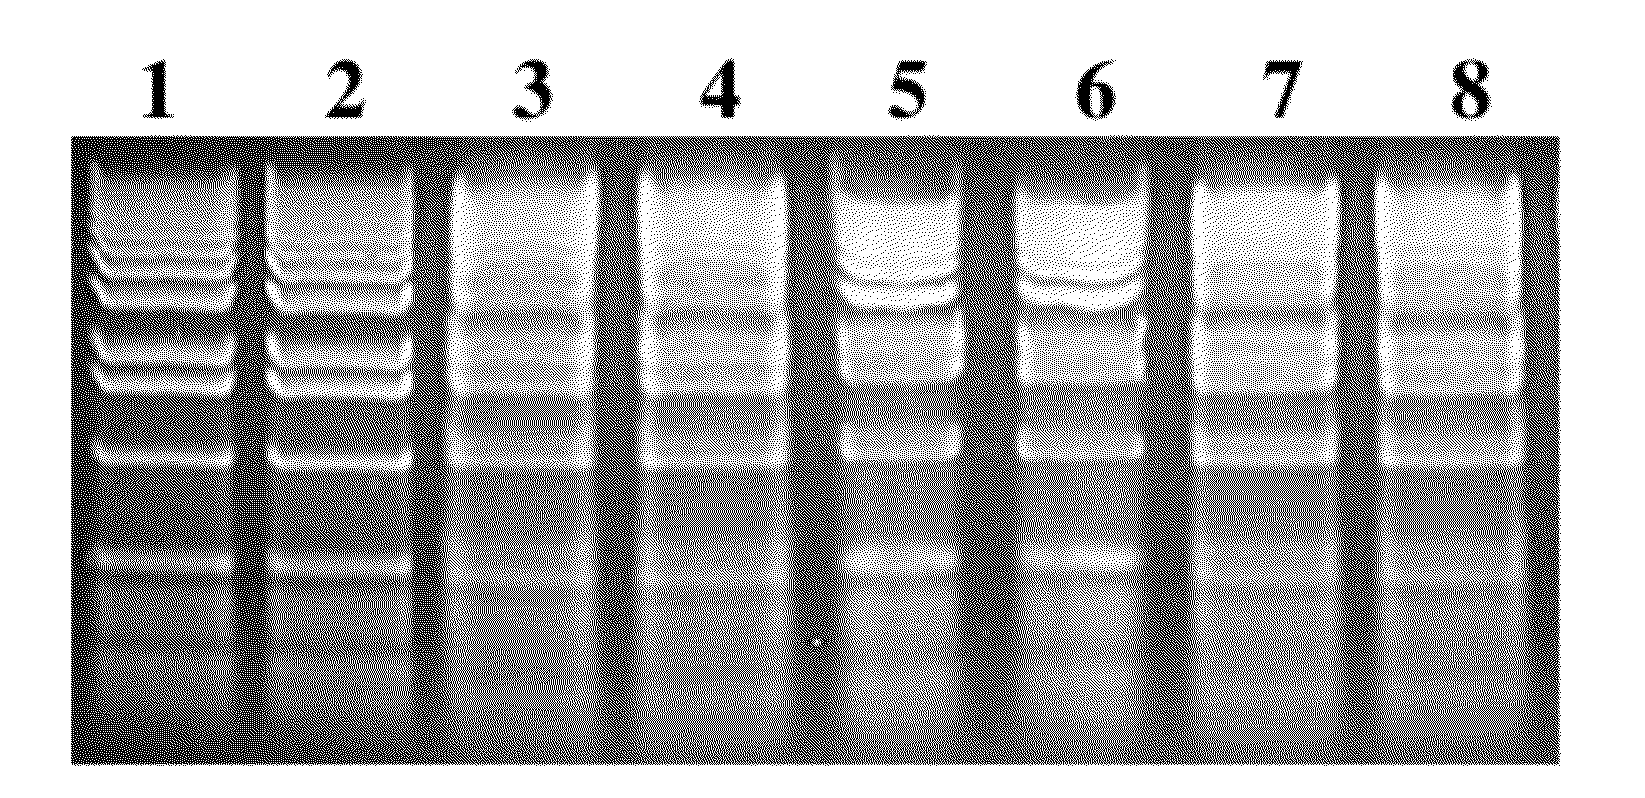 Dry compositions and methods for gel electrophoresis